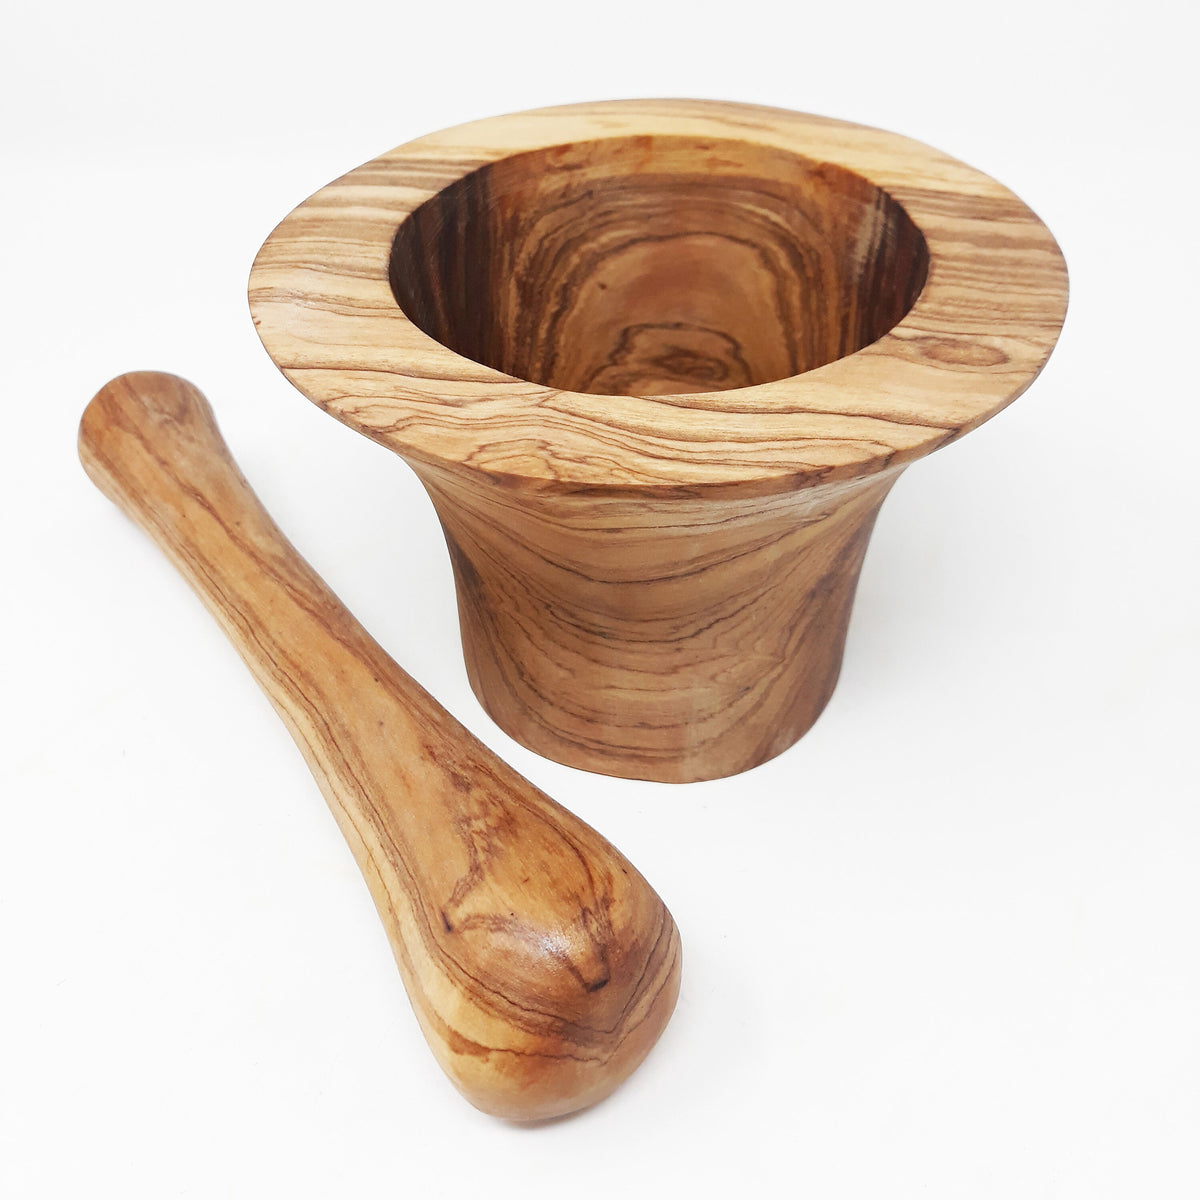 Traditional Olive Wood Pestle and Mortar, Rustic Pestle and Mortar, Herb Grinder,  Wooden Spice Grinder, Rustic Wooden Pestle and Mortar